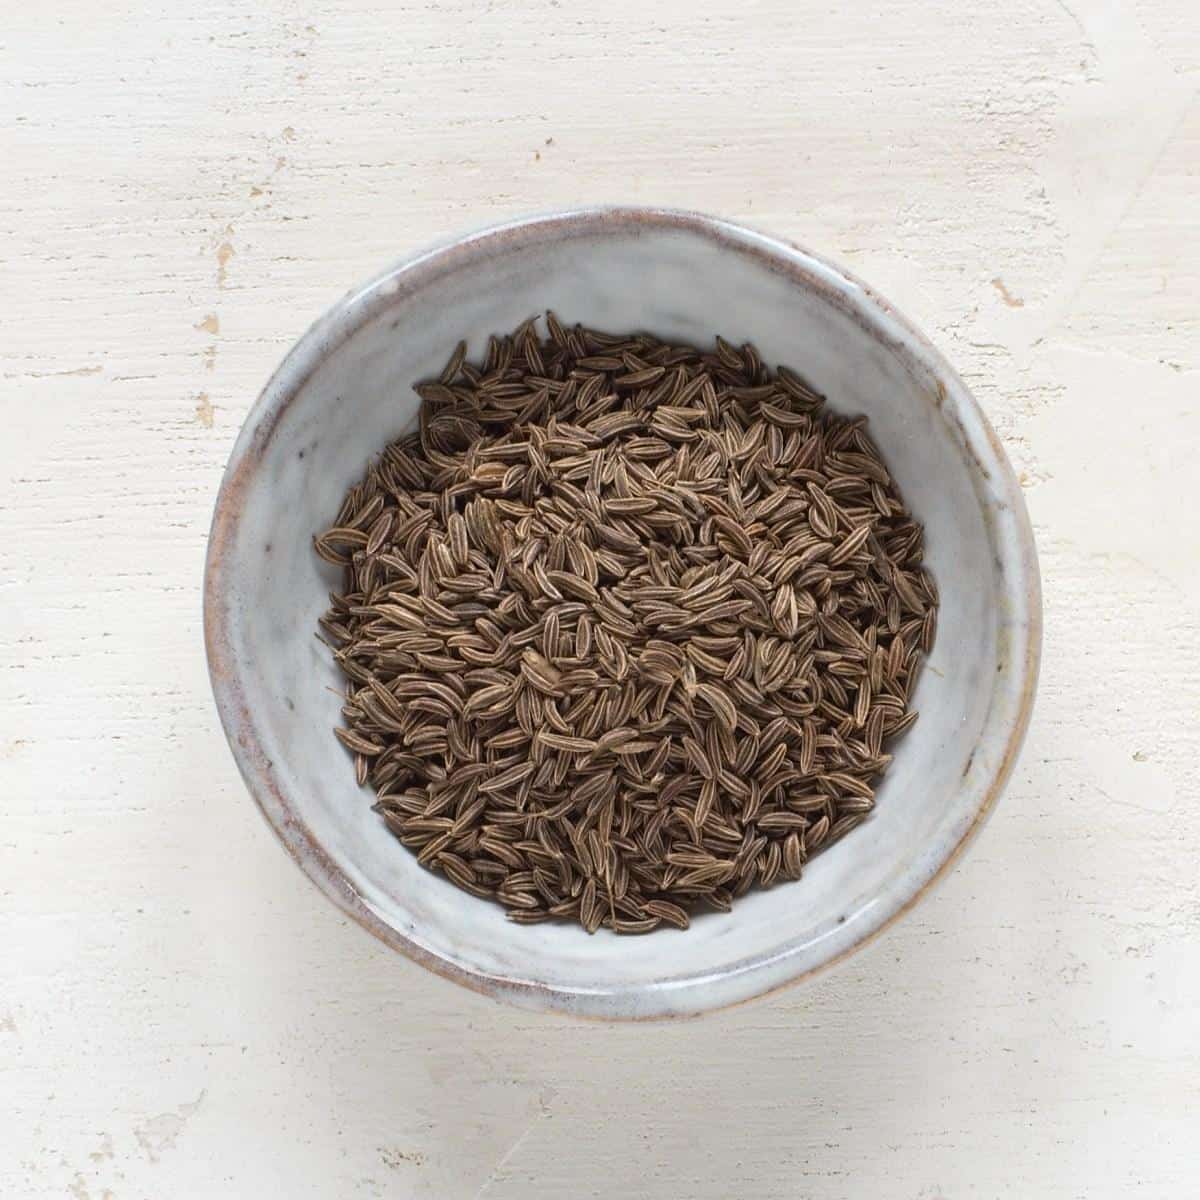 Whole caraway seeds in a small bowl.